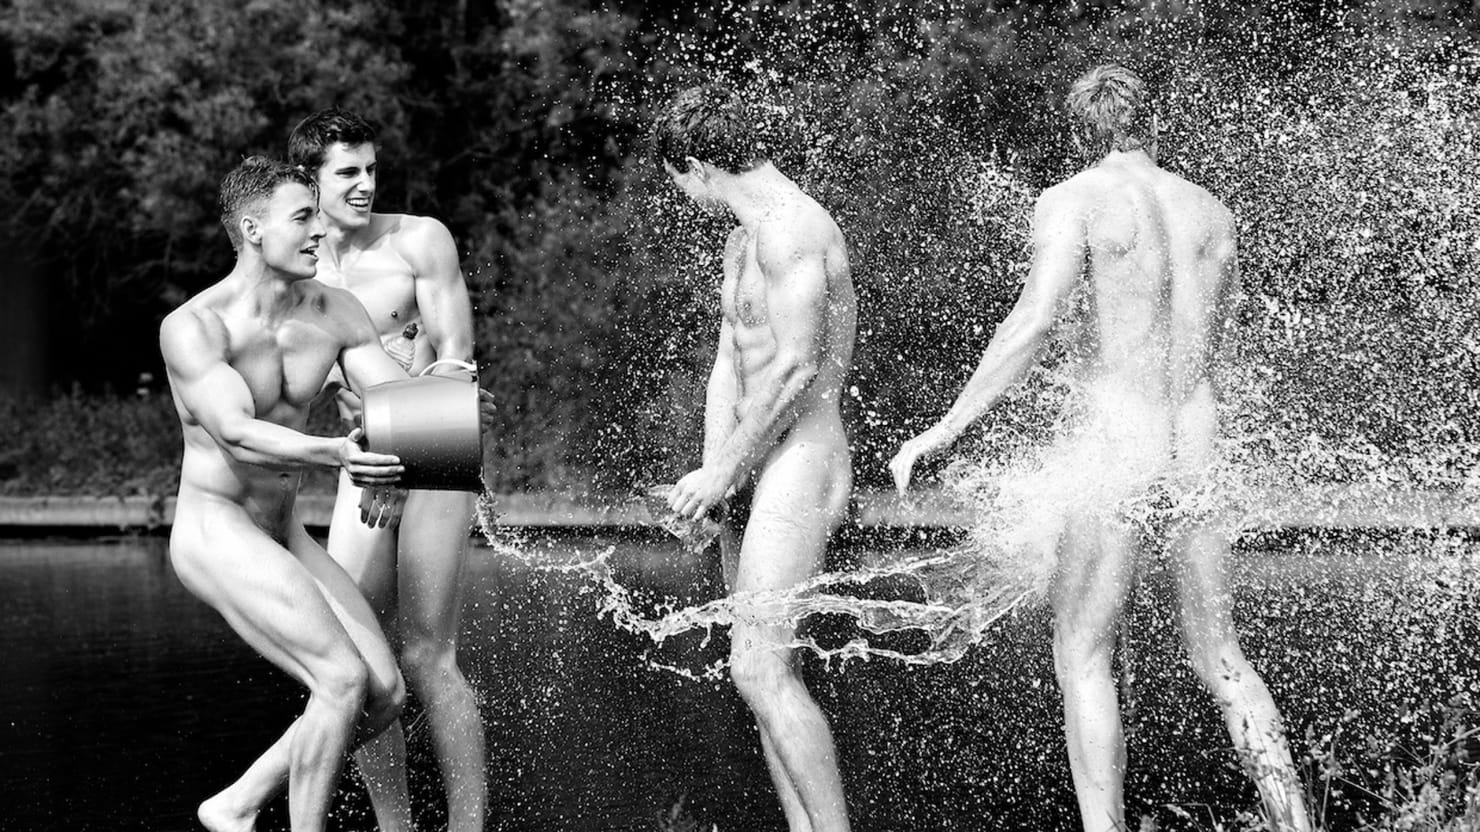 Naked Rowers' Pose For Charity To Help Fight Homophobia